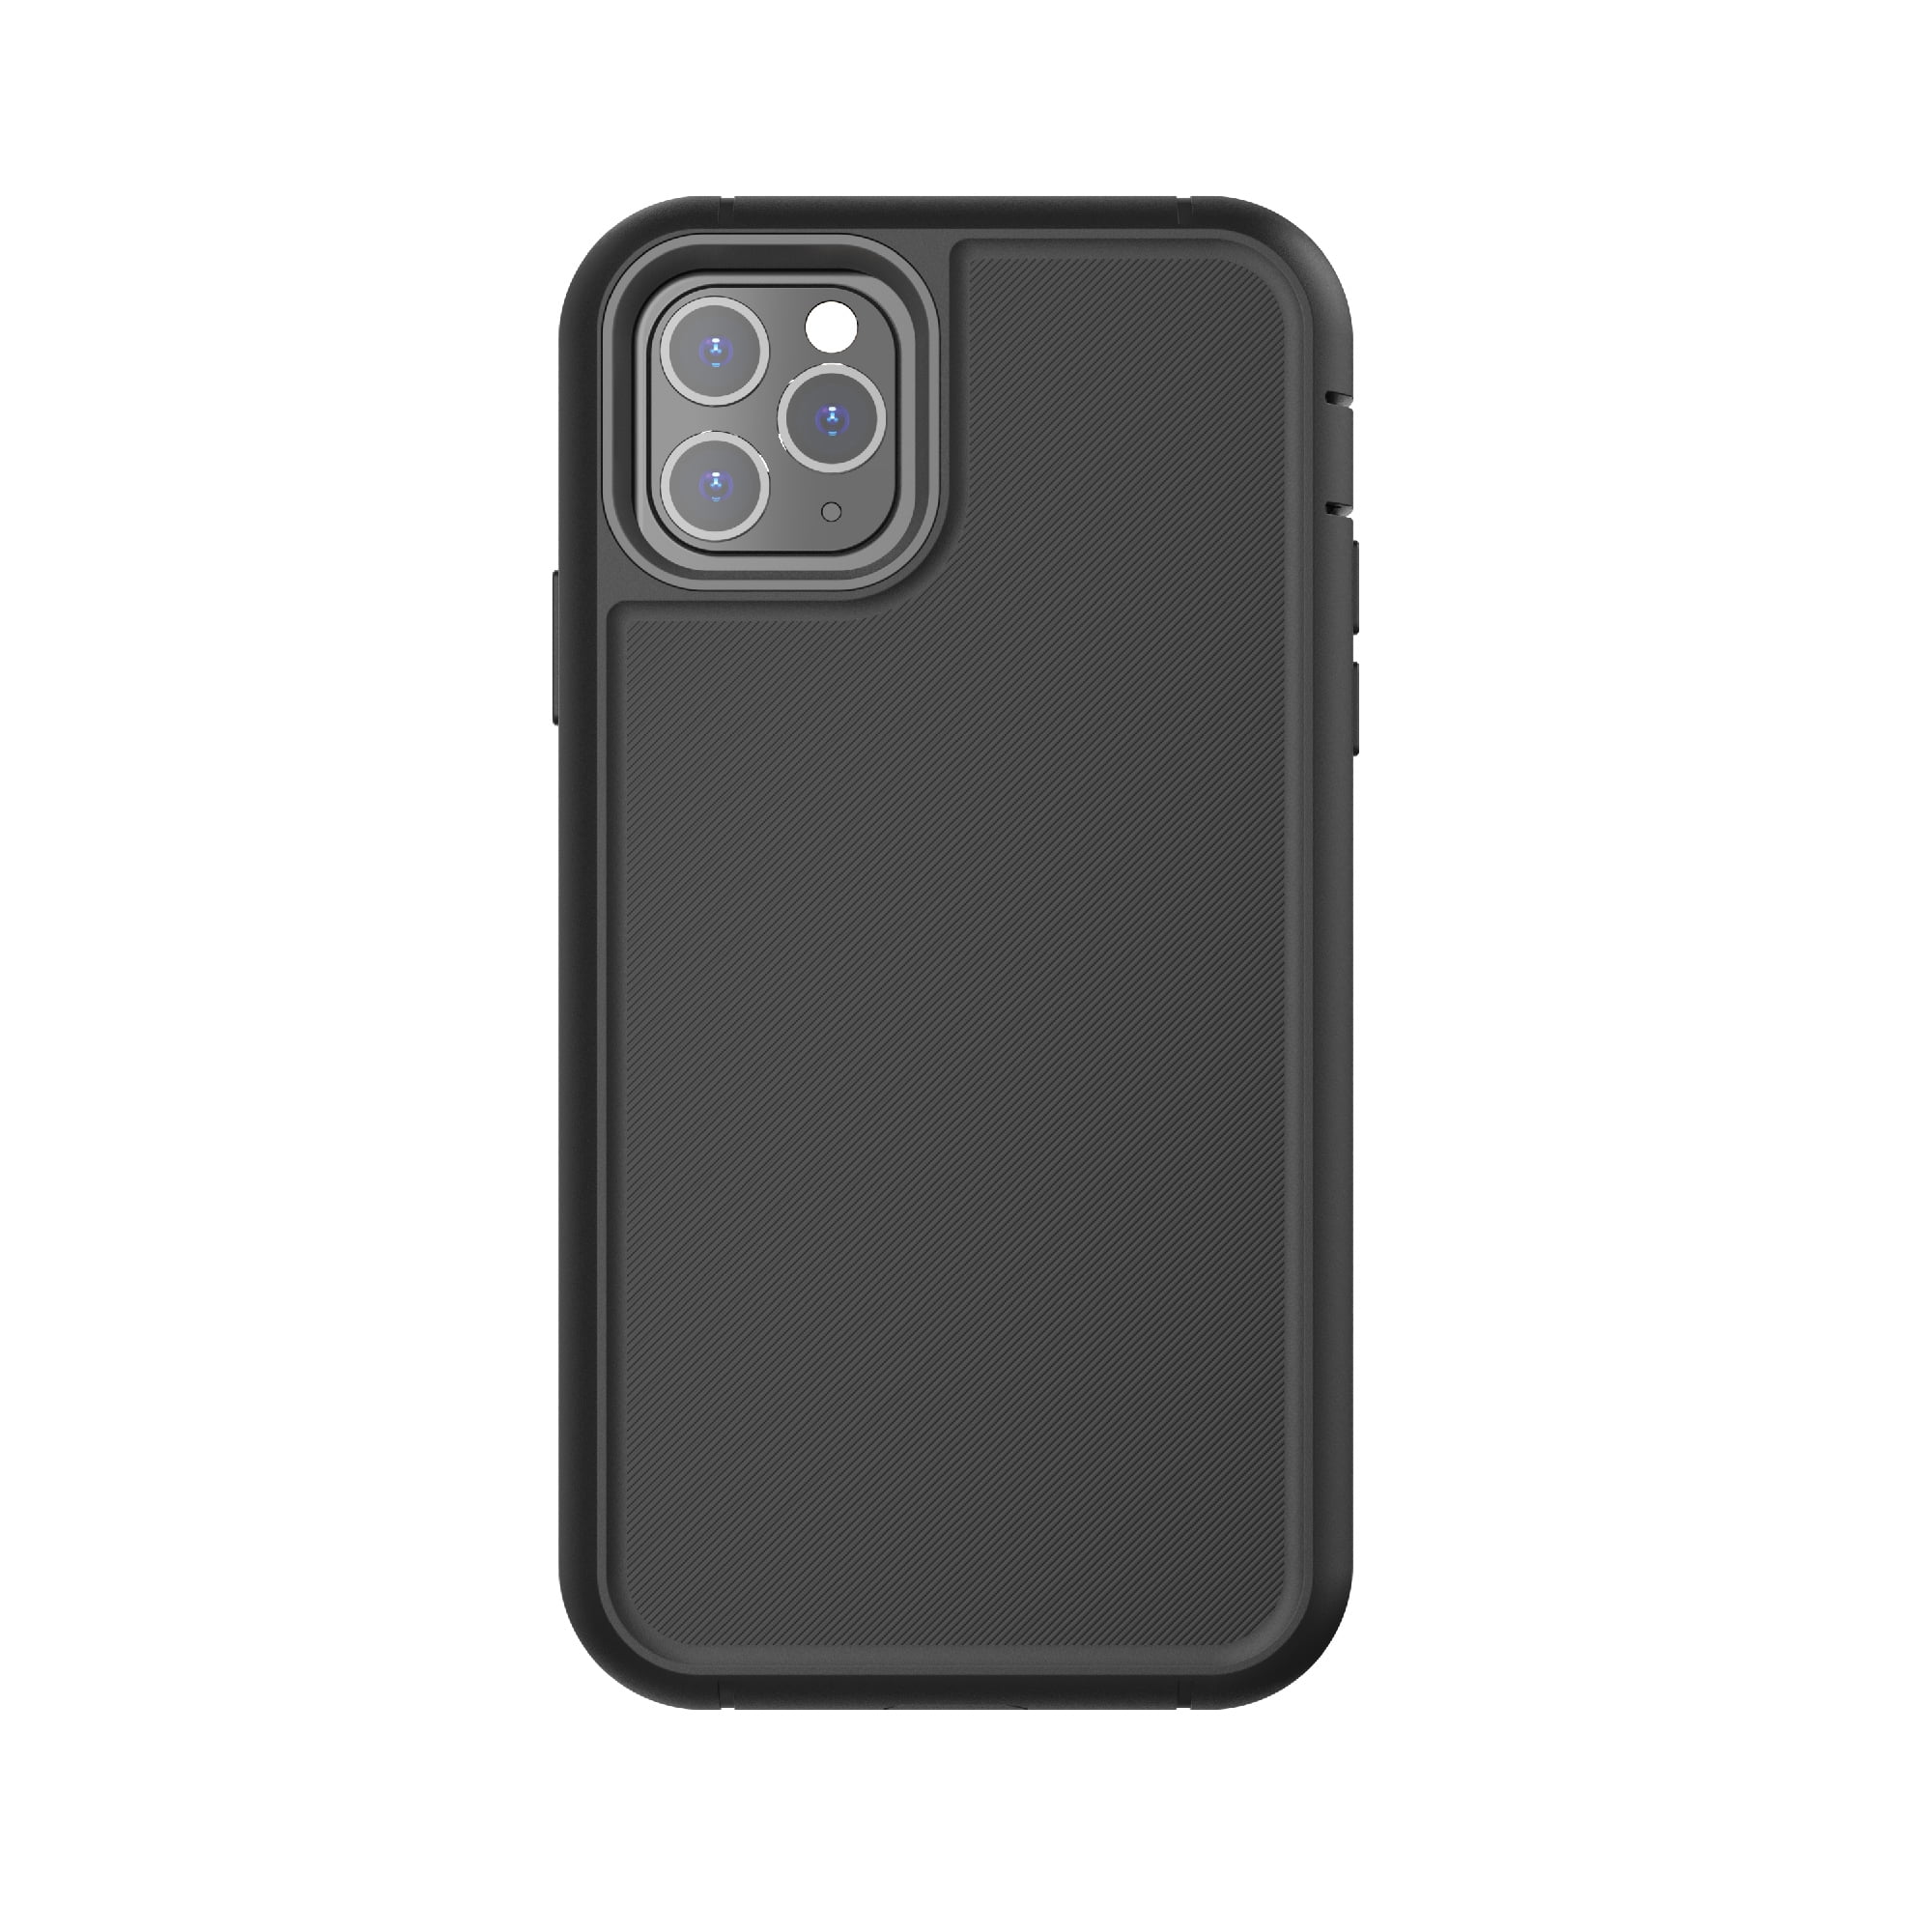 onn. Rugged Phone Case with Built-In Microbial Protection for iPhone 11 Pro Max - Black